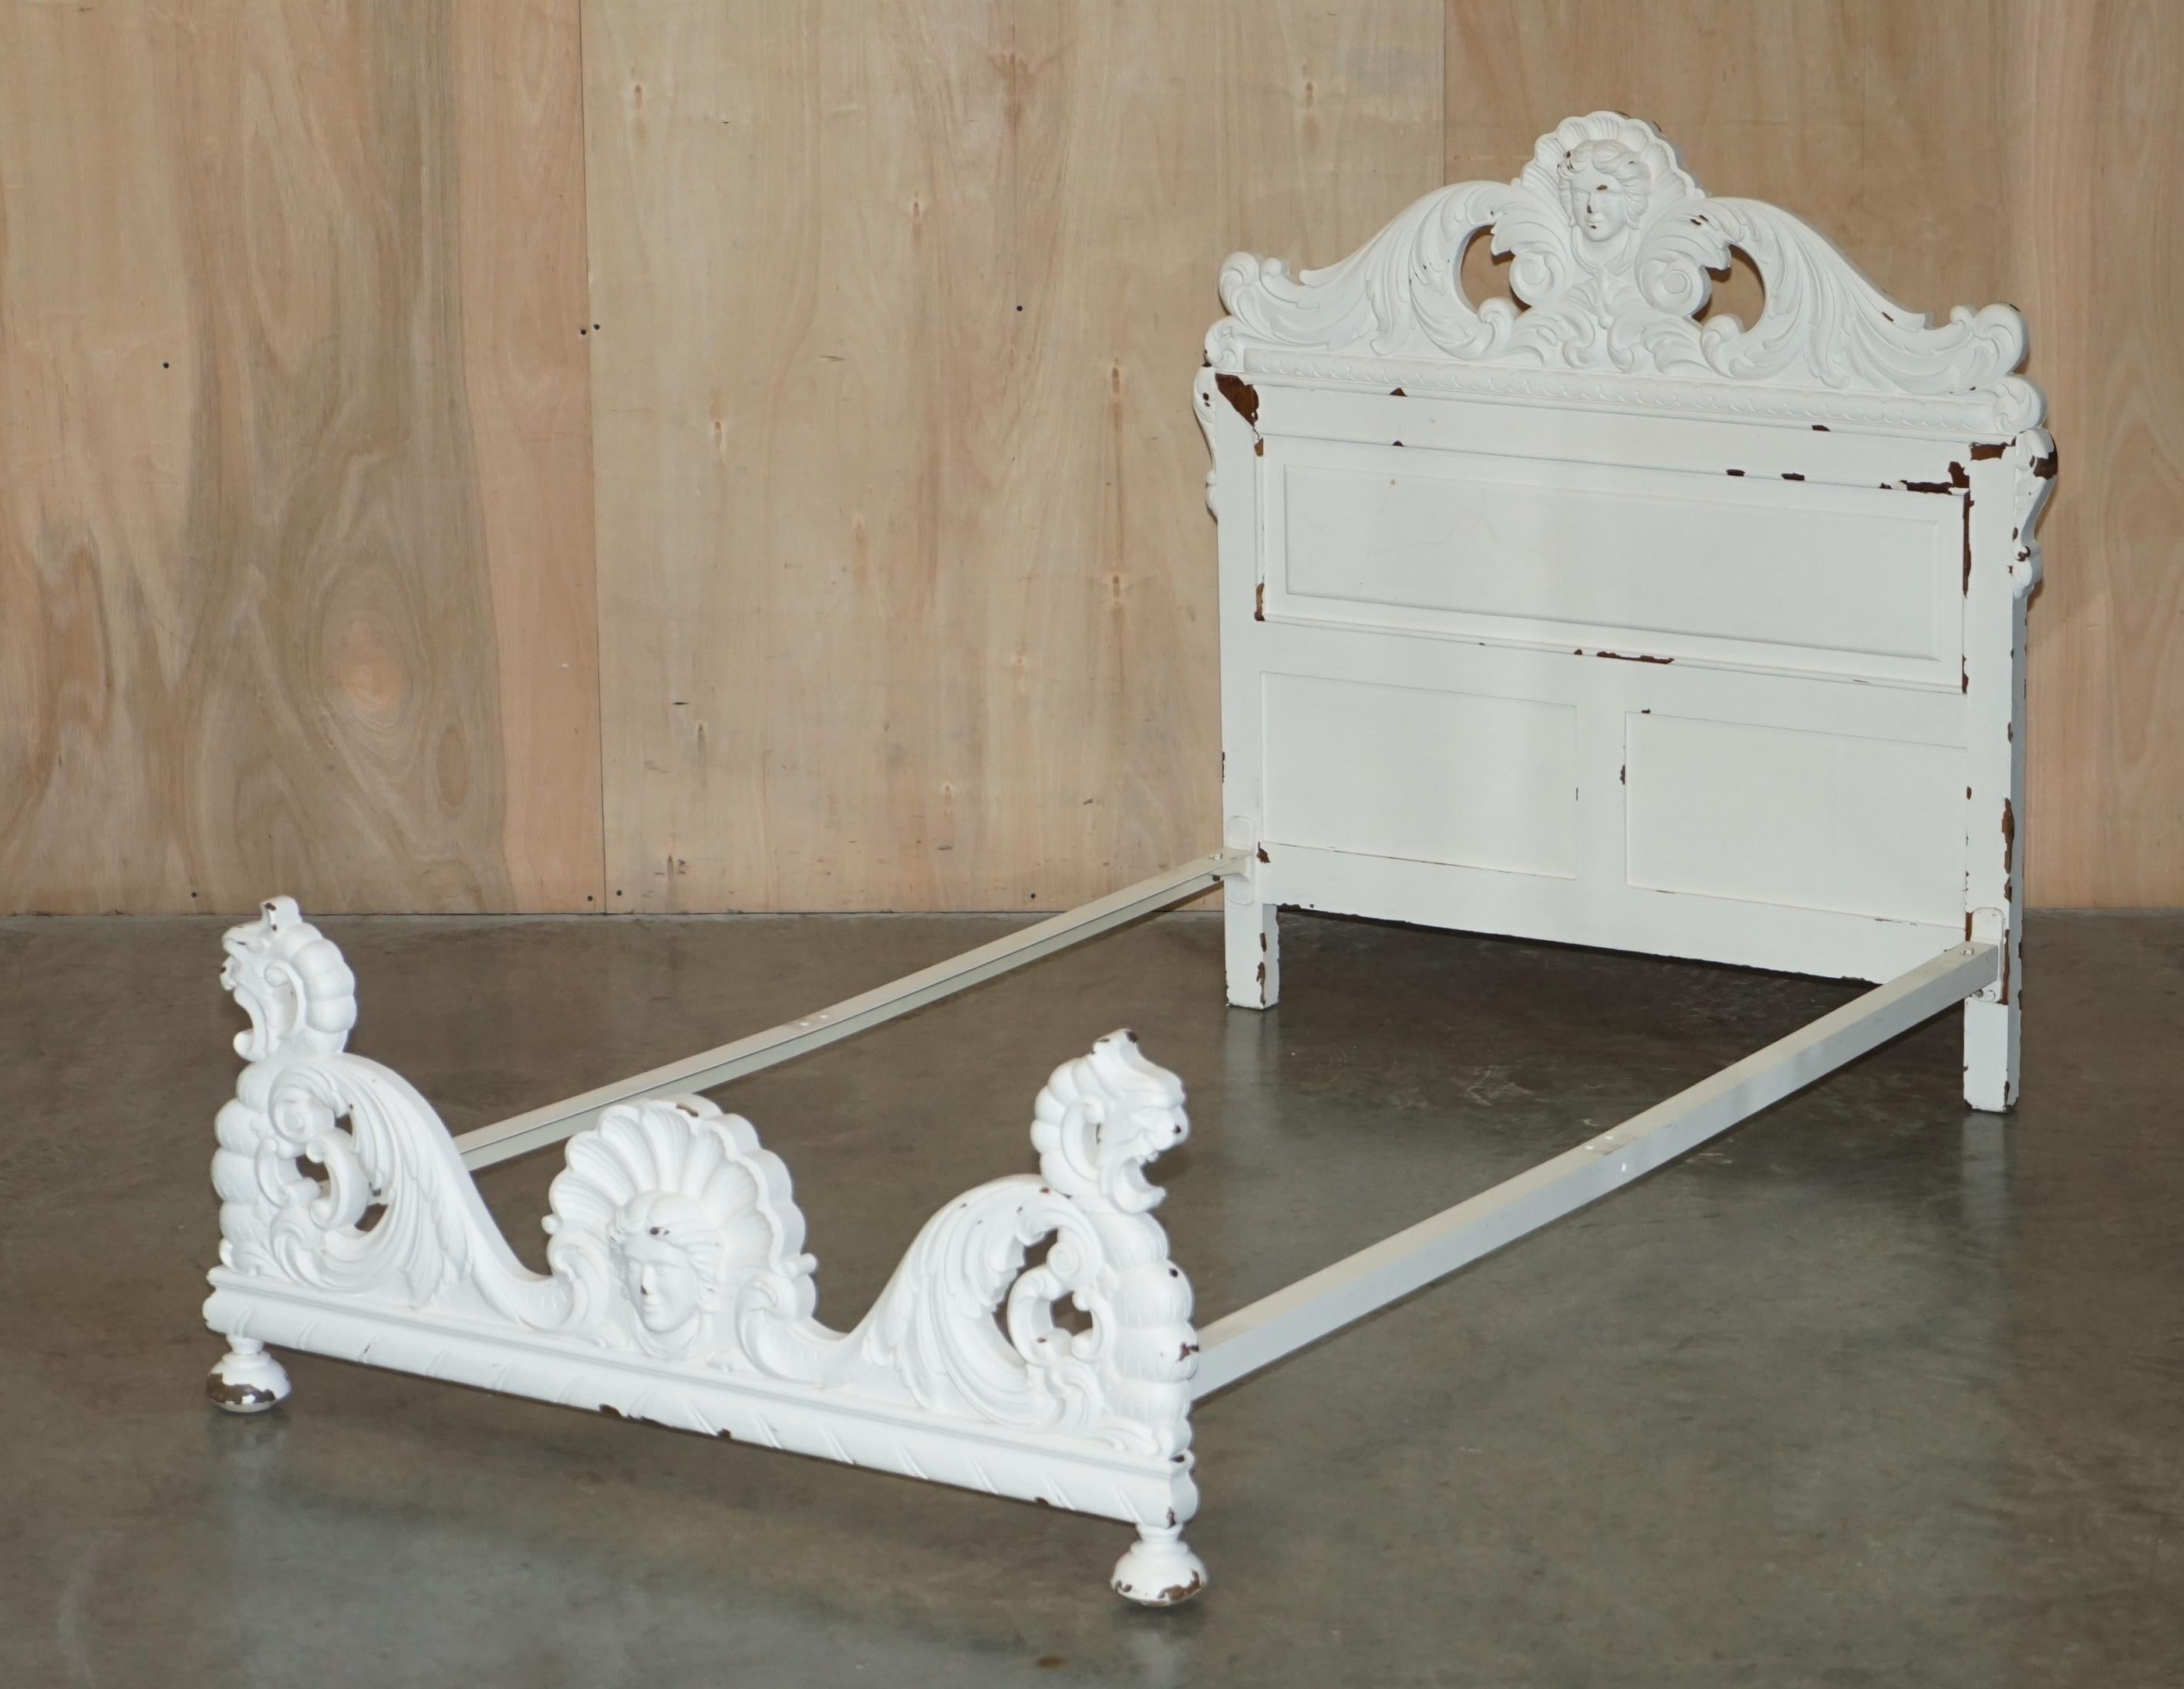 Royal House Antiques

Royal House Antiques is delighted to offer for sale this finest quality, pair of hand carved solid Elm Bedsteads with ornate detailing and antique paint 

Please note the delivery fee listed is just a guide, it covers within